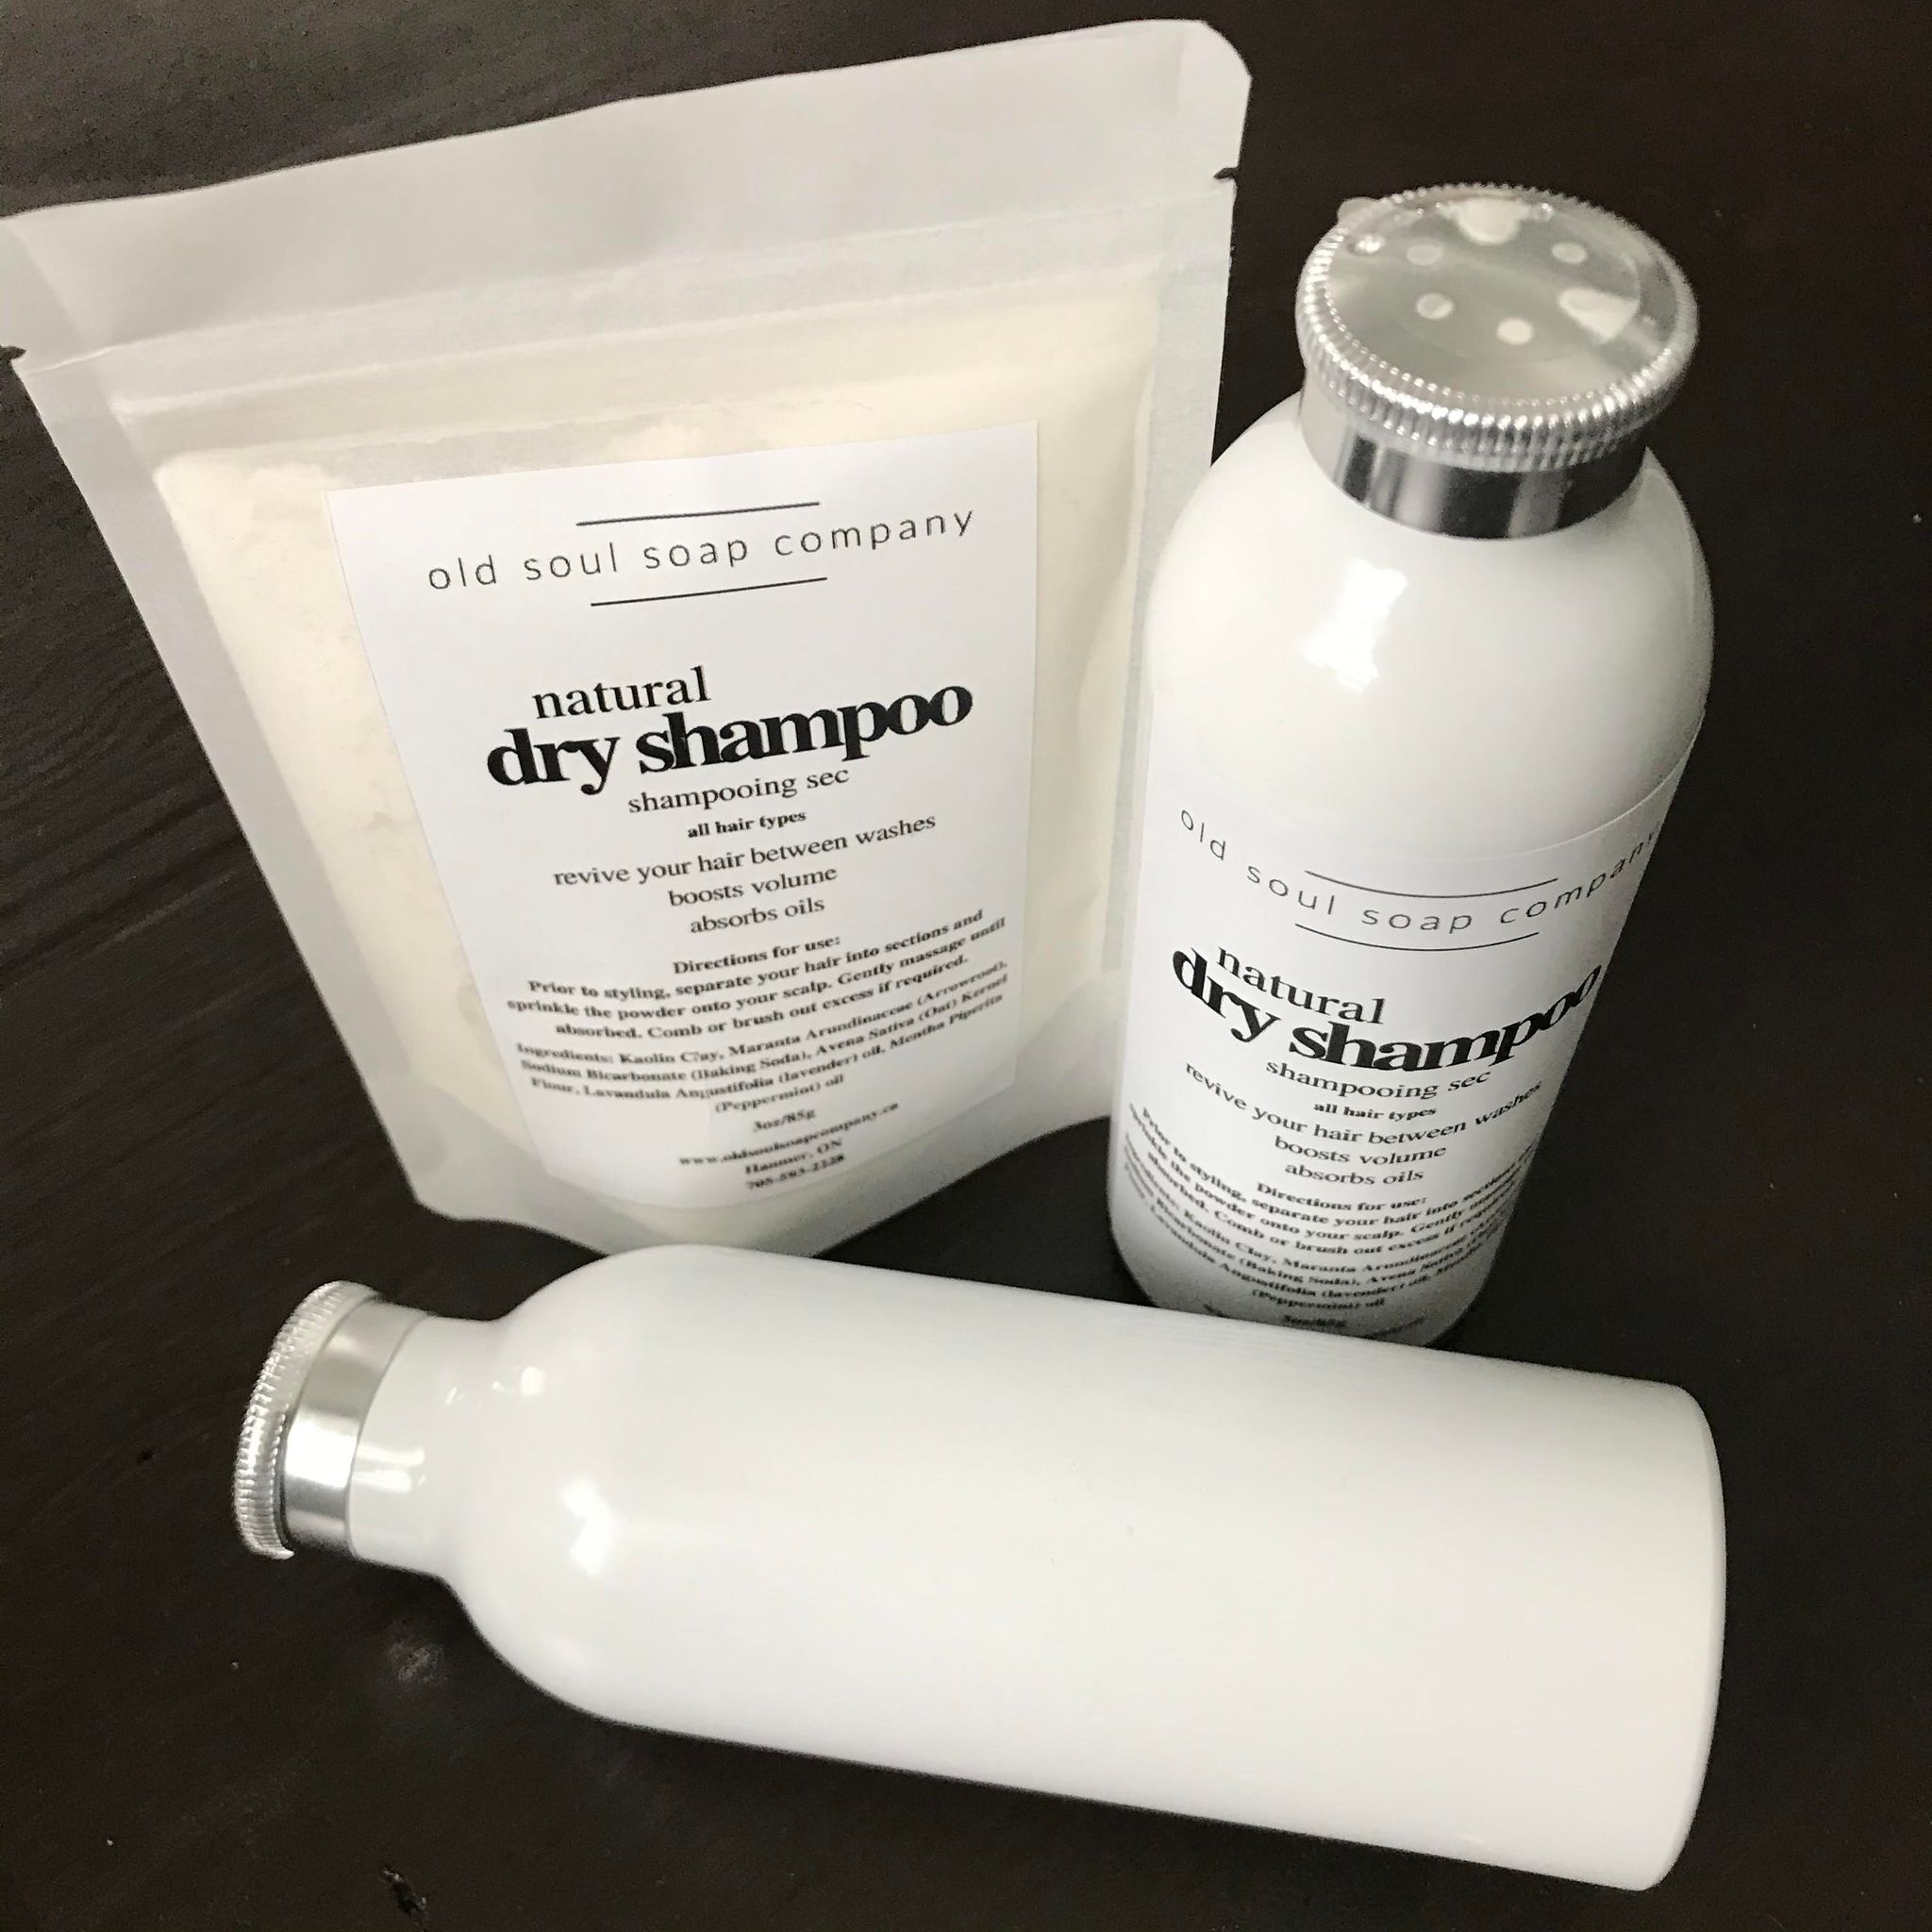 Natural dry shampoo in a shaker bottle or compostable pouch helps revive your hair between washes, boosts volume and absorbs oils. Empty shaker bottles sold separately.